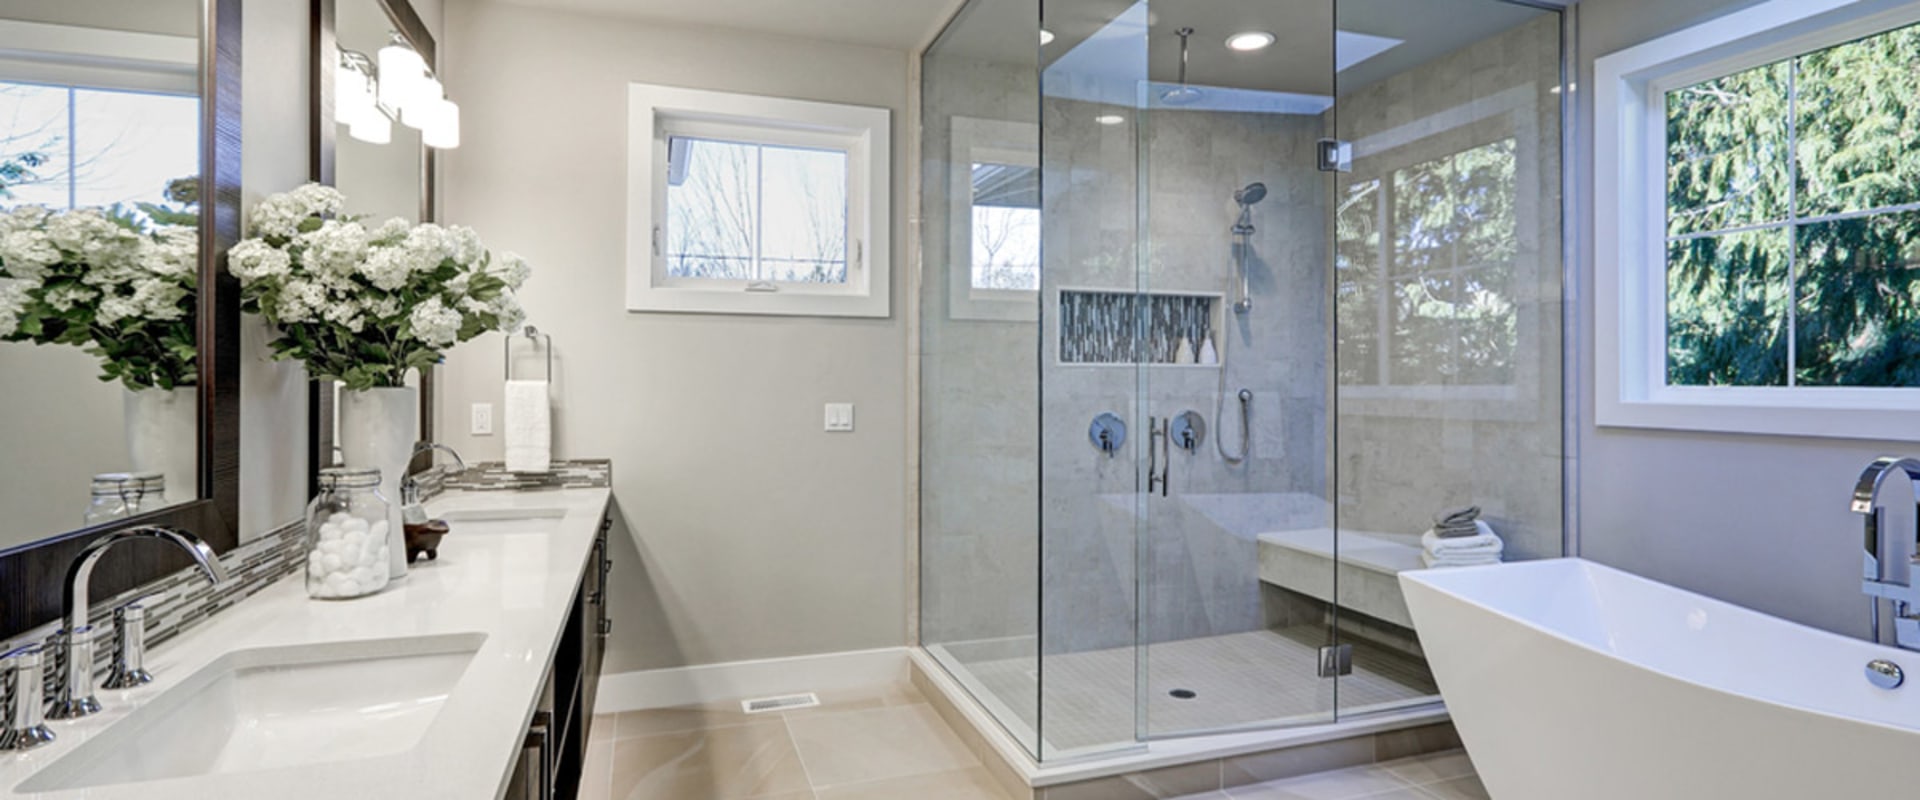 How much does it cost to put a glass door on a shower?